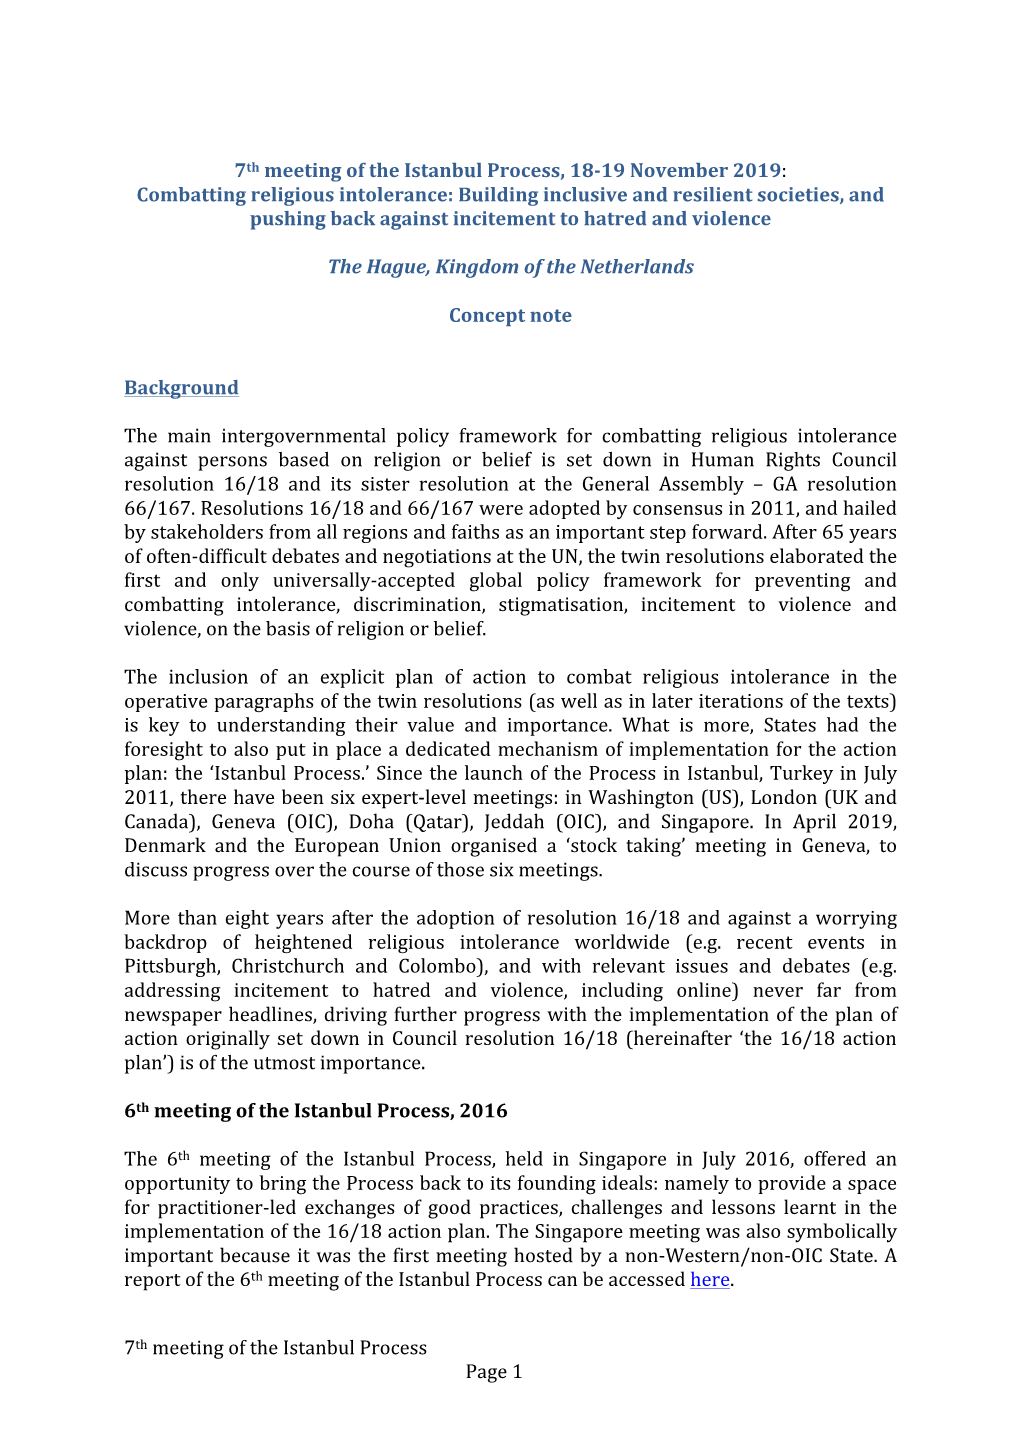 7Th Meeting of the Istanbul Process Page 1 7Th Meeting of the Istanbul Process, 18-19 November 2019: Combatting Religious In